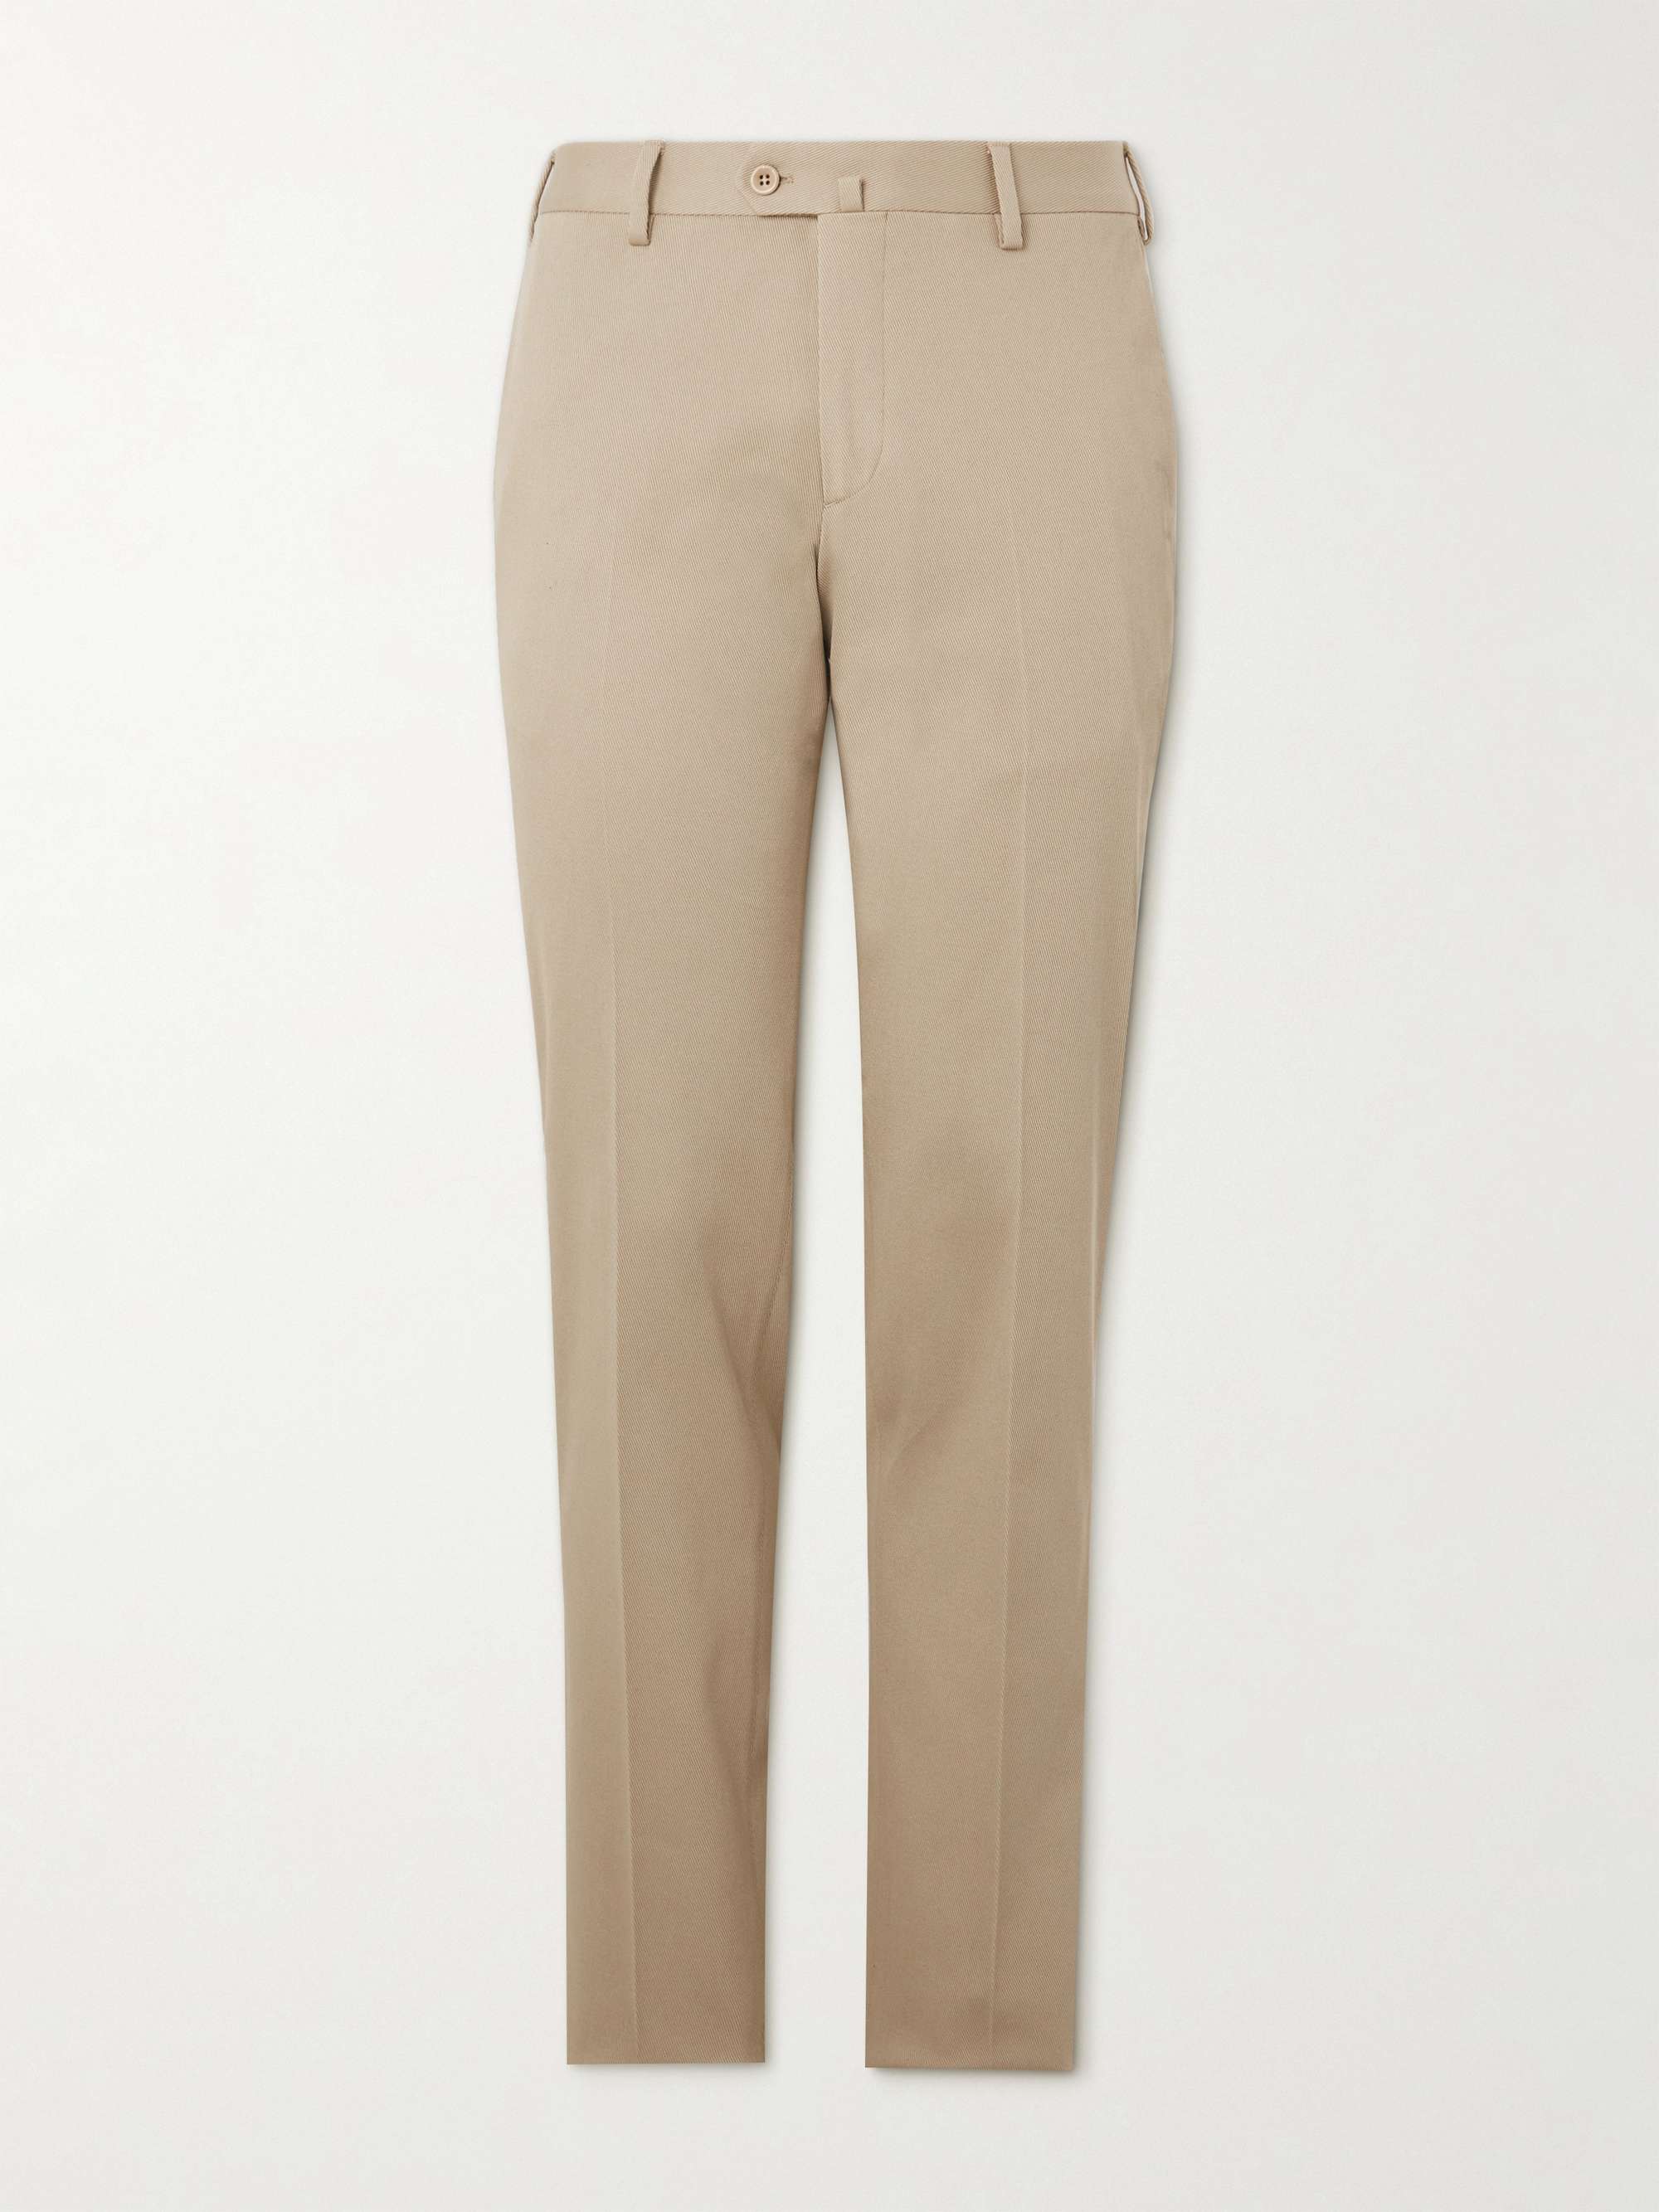 LORO PIANA Slim-Fit Tapered Stretch-Cotton Twill Trousers for Men